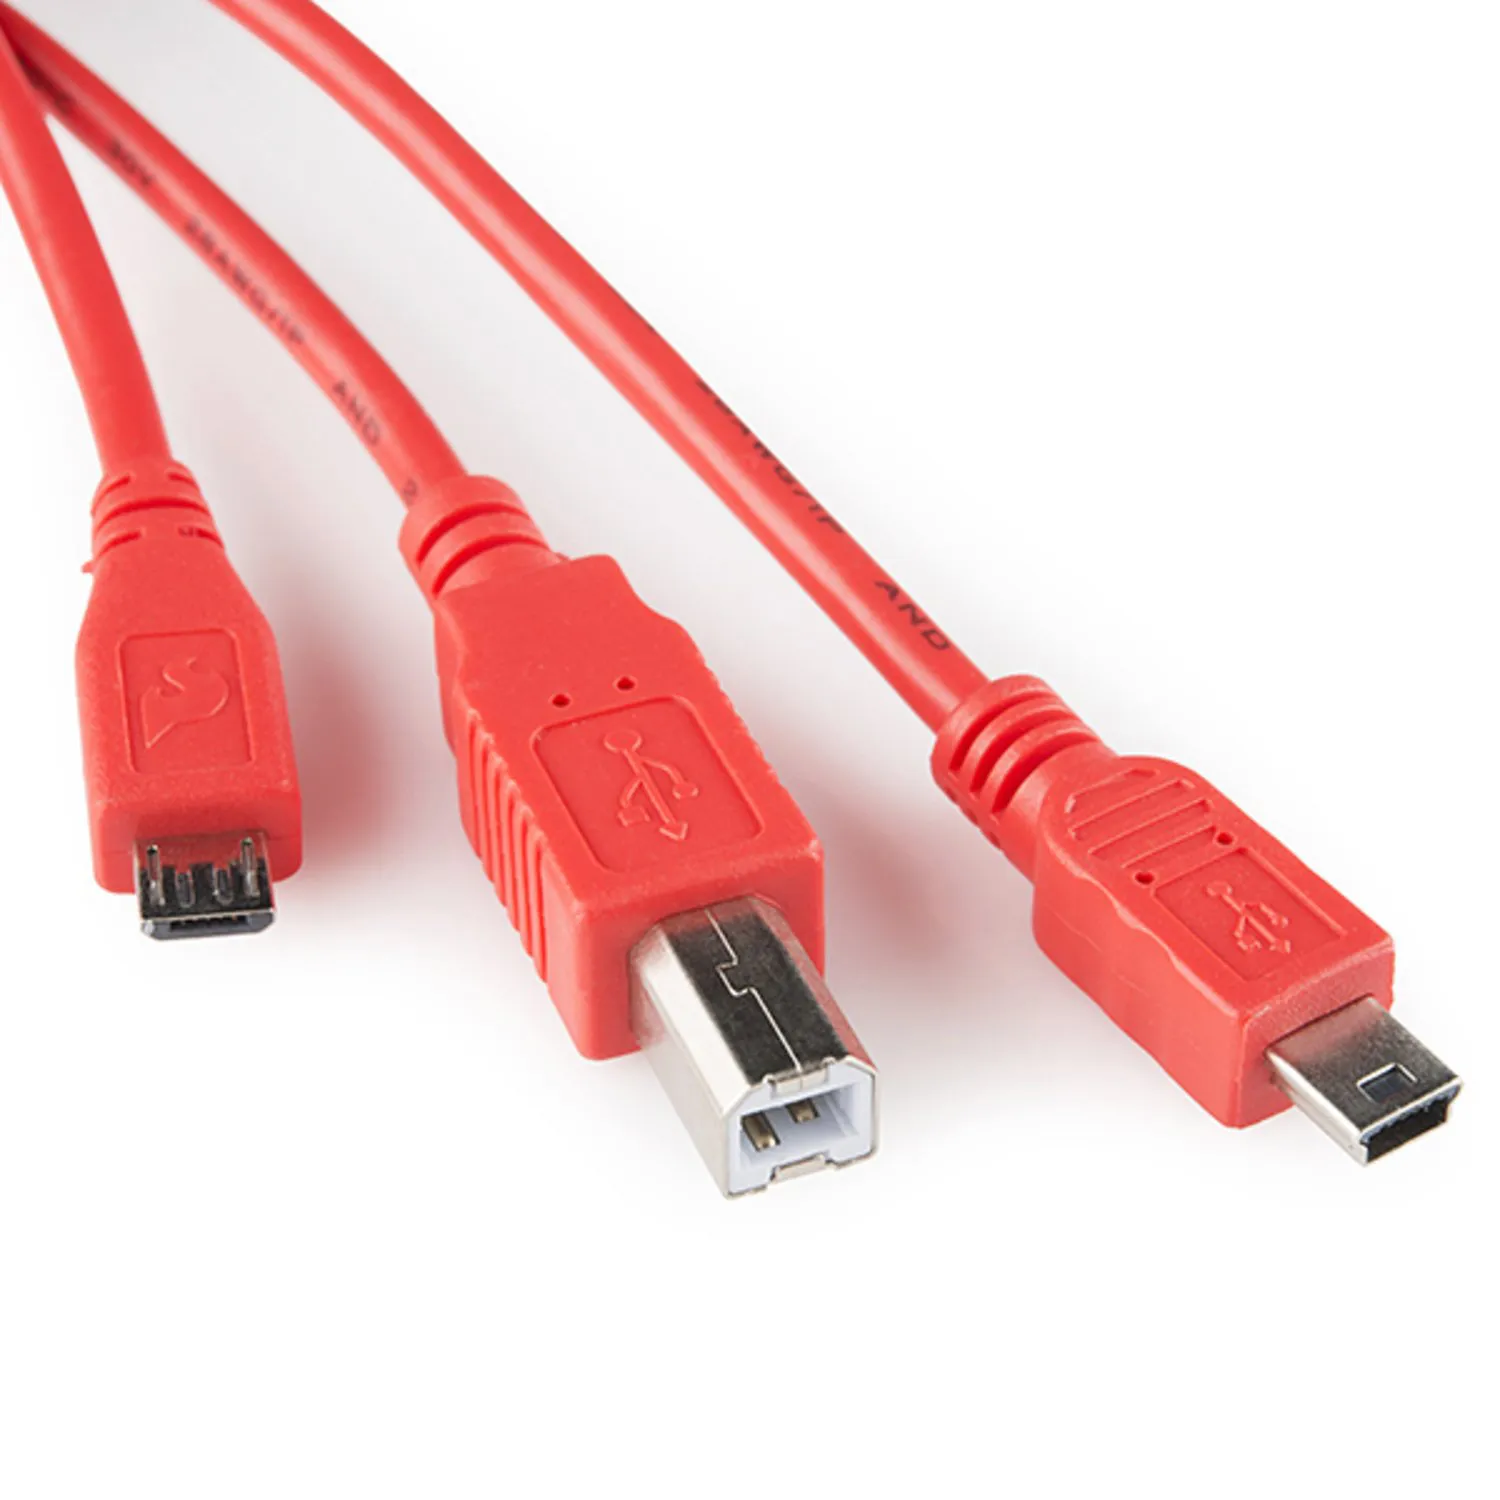 Photo of SparkFun Cerberus USB Cable - 6ft